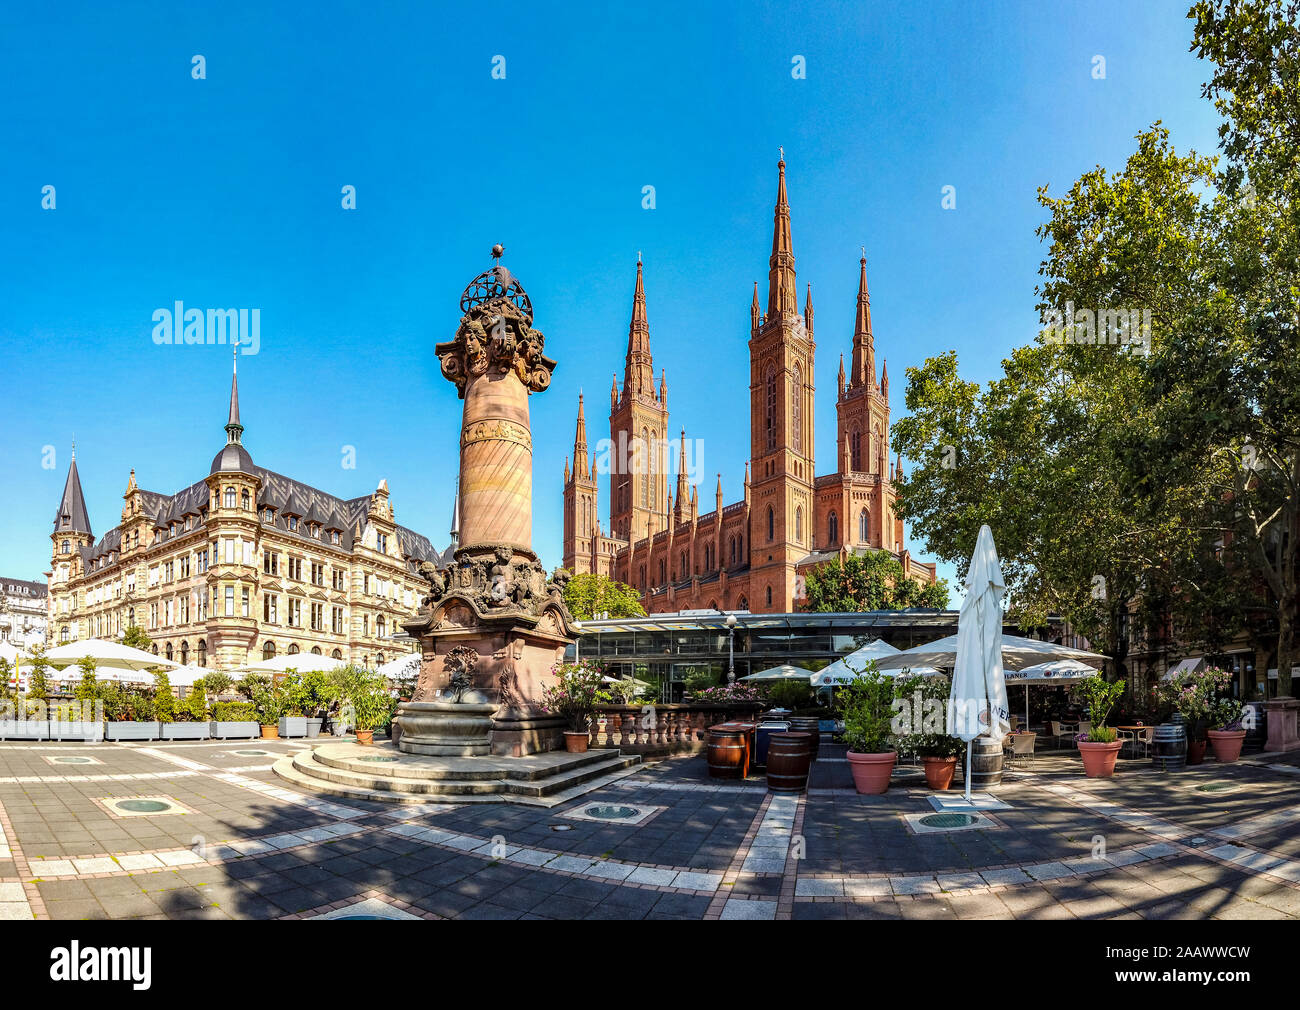 View over market square with new city hall and church, Wiesbaden, Germany Stock Photo